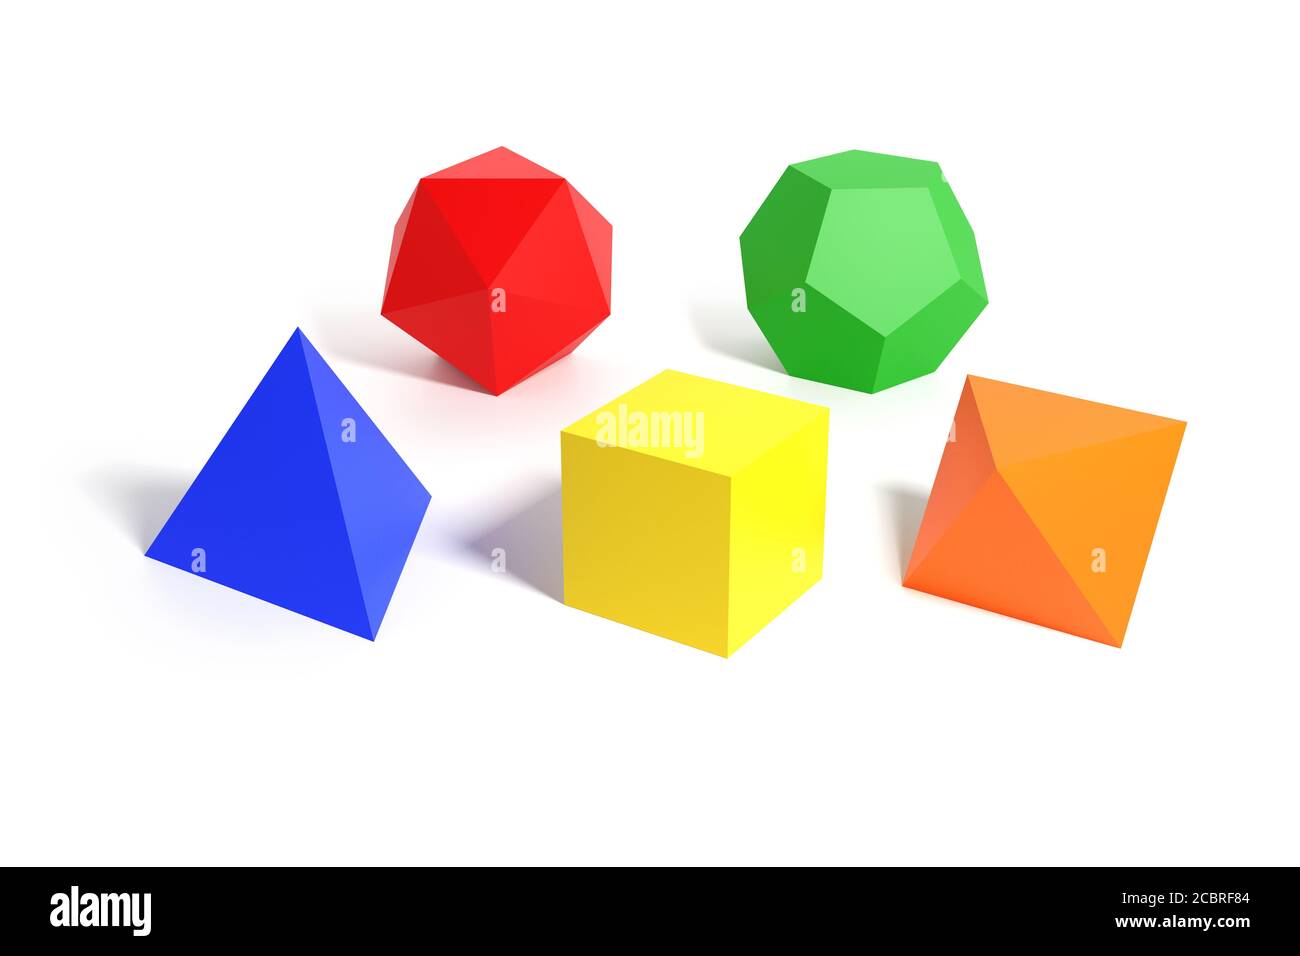 Platonic solids. Tetrahedron, hexahedron, octahedron, dodecahedron and icosahedron of different colors isolated on a white background. 3d illustration Stock Photo